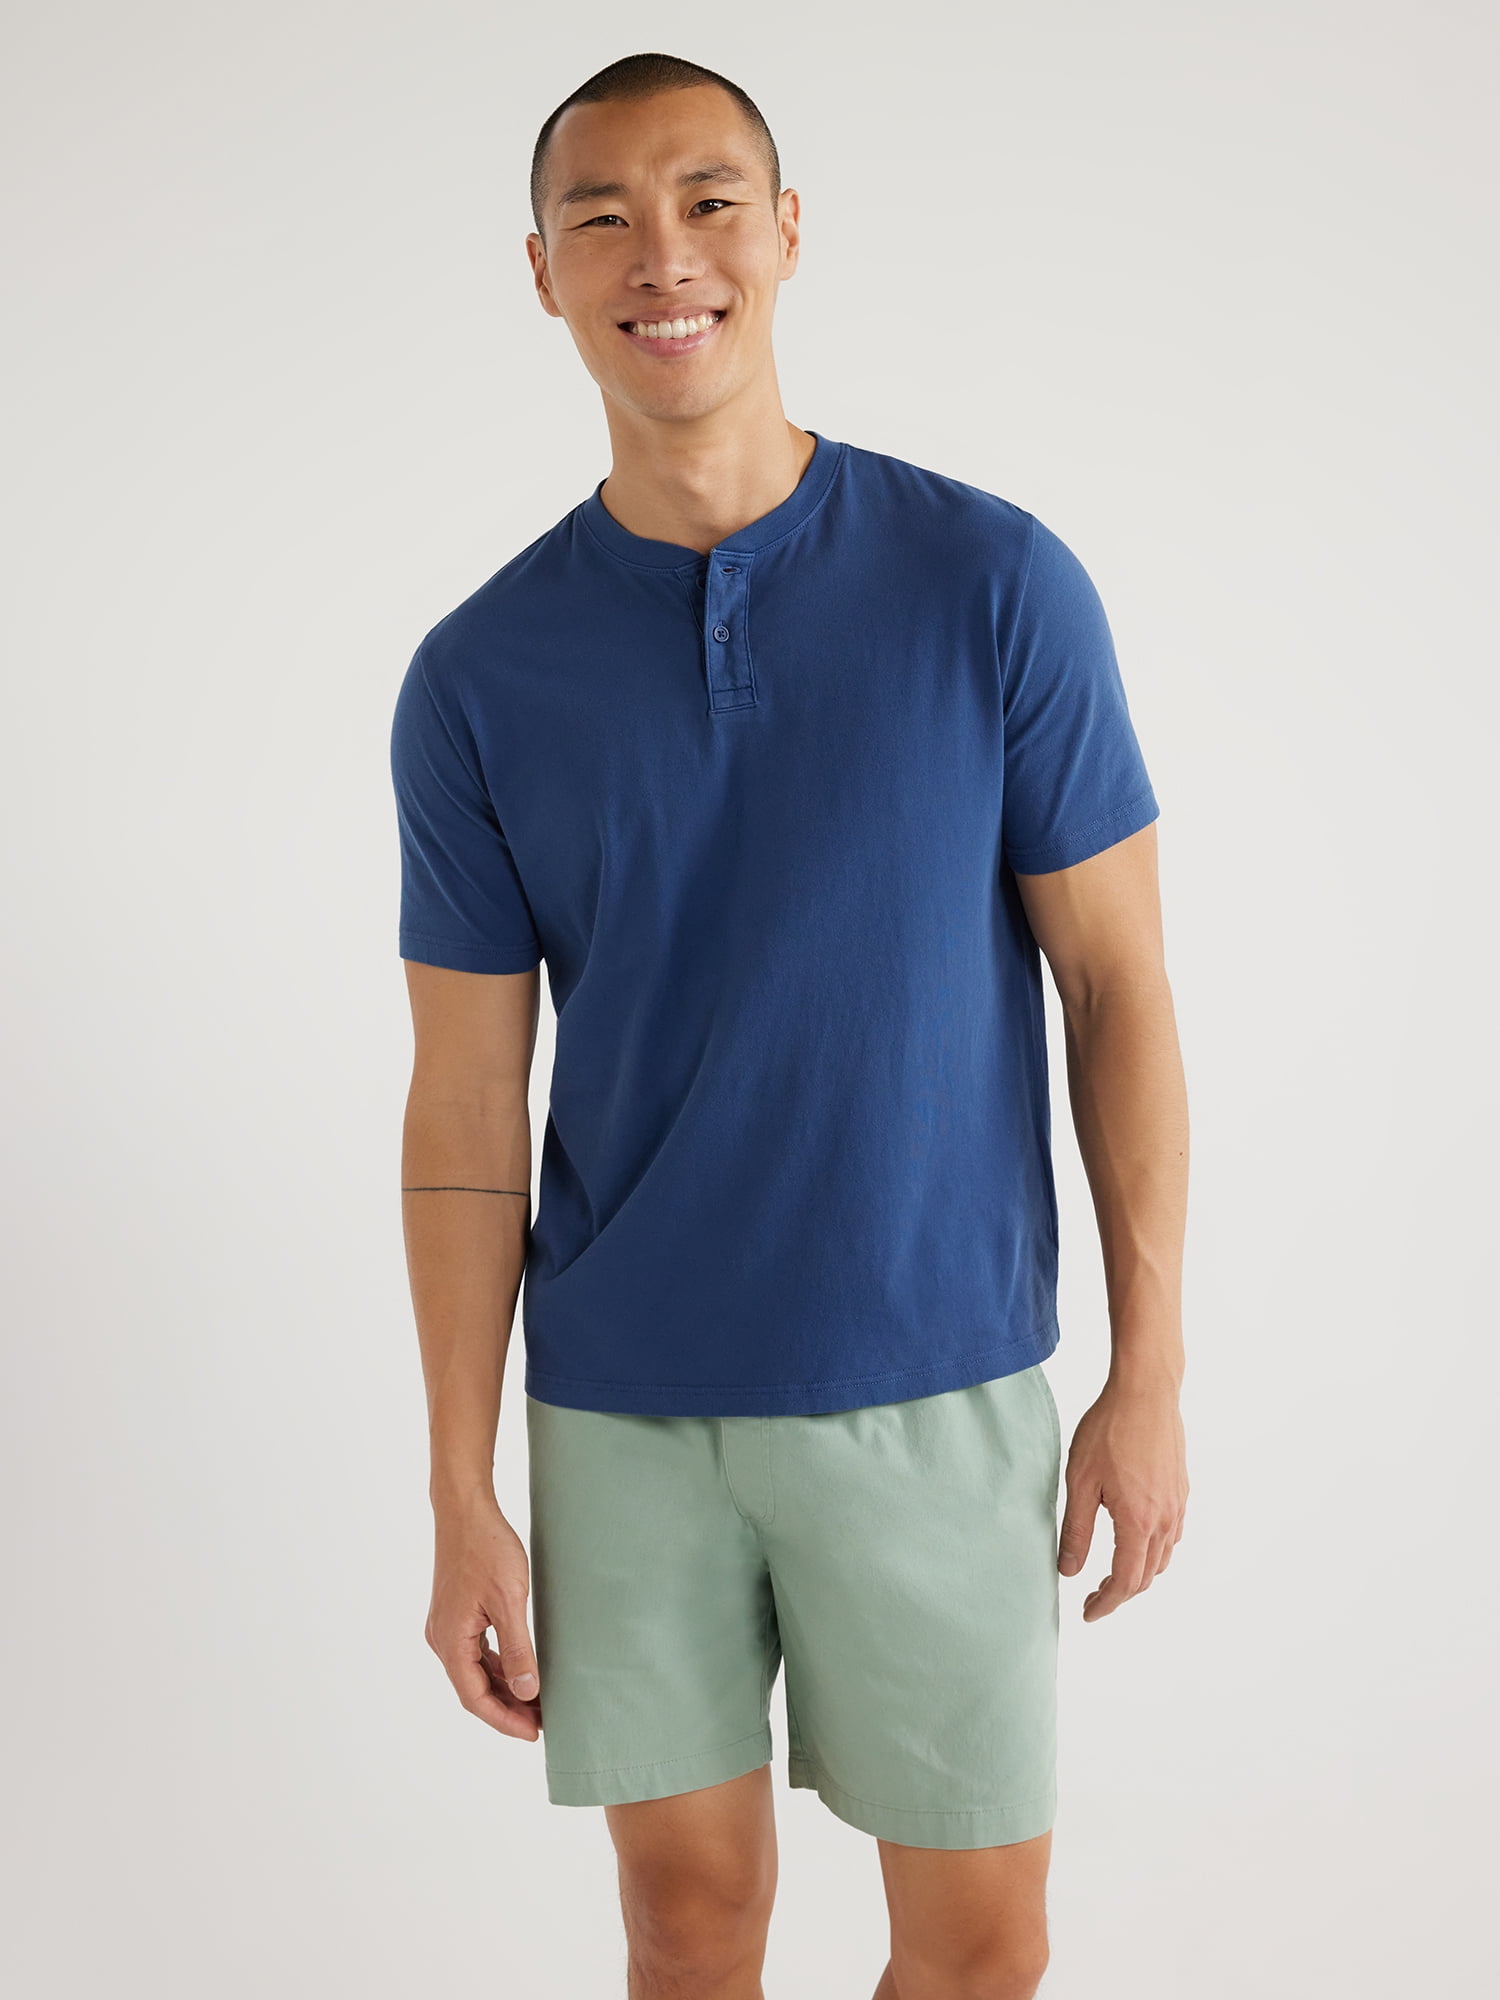 Free Assembly Men's Henley Shirt with Short Sleeves, Sizes S-3XL ...